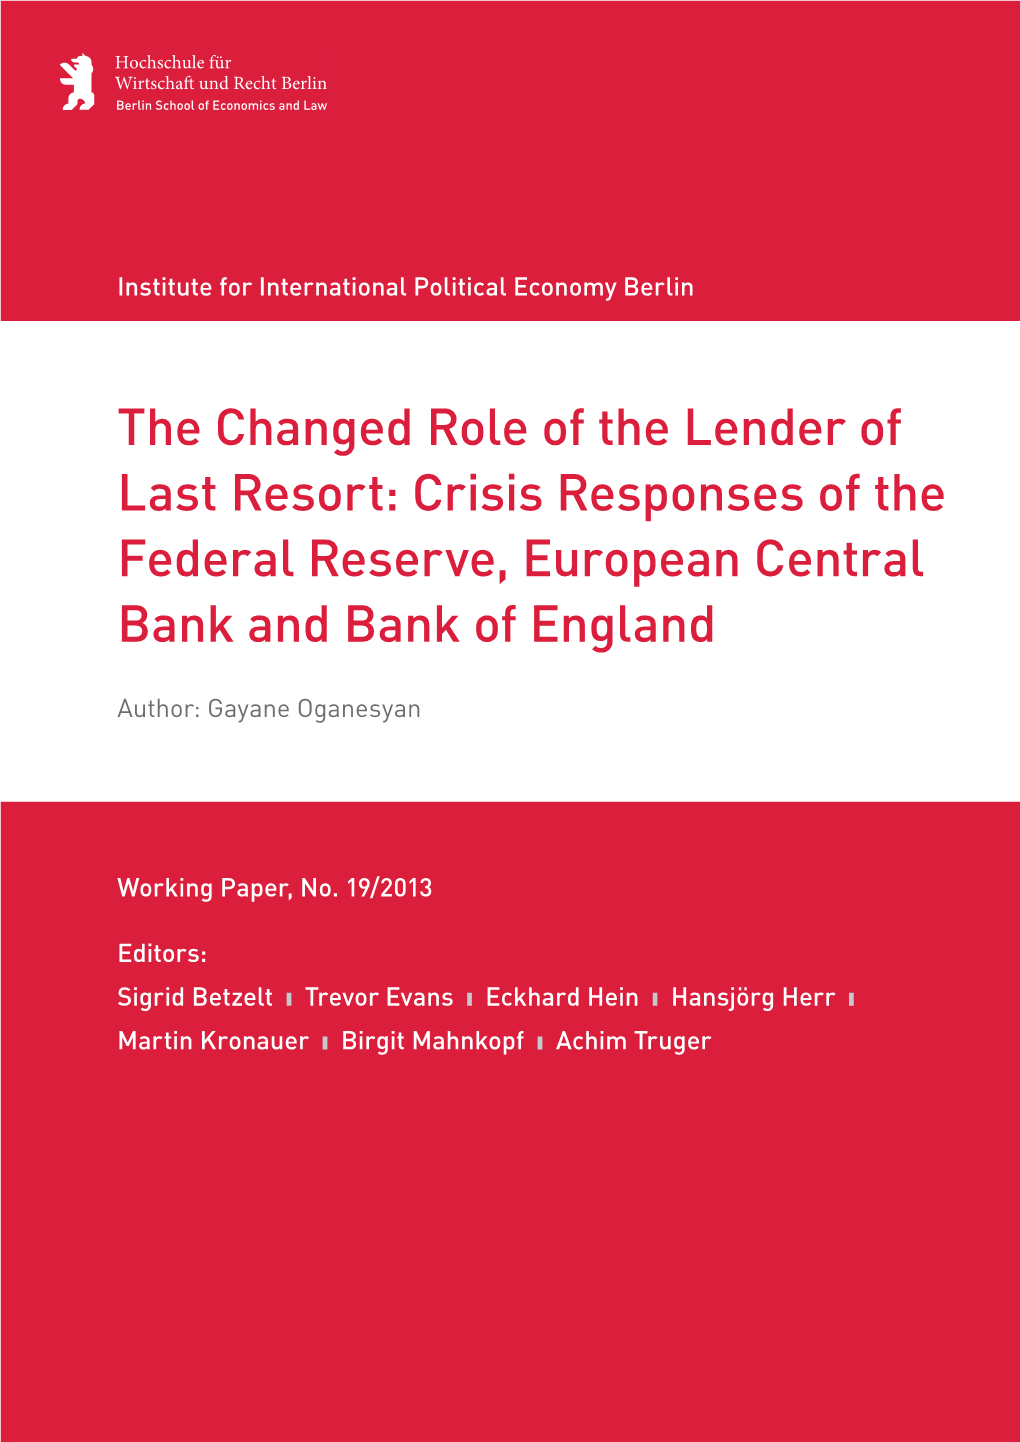 The Changed Role of the Lender of Last Resort: Crisis Responses of the Federal Reserve, European Central Bank and Bank of England